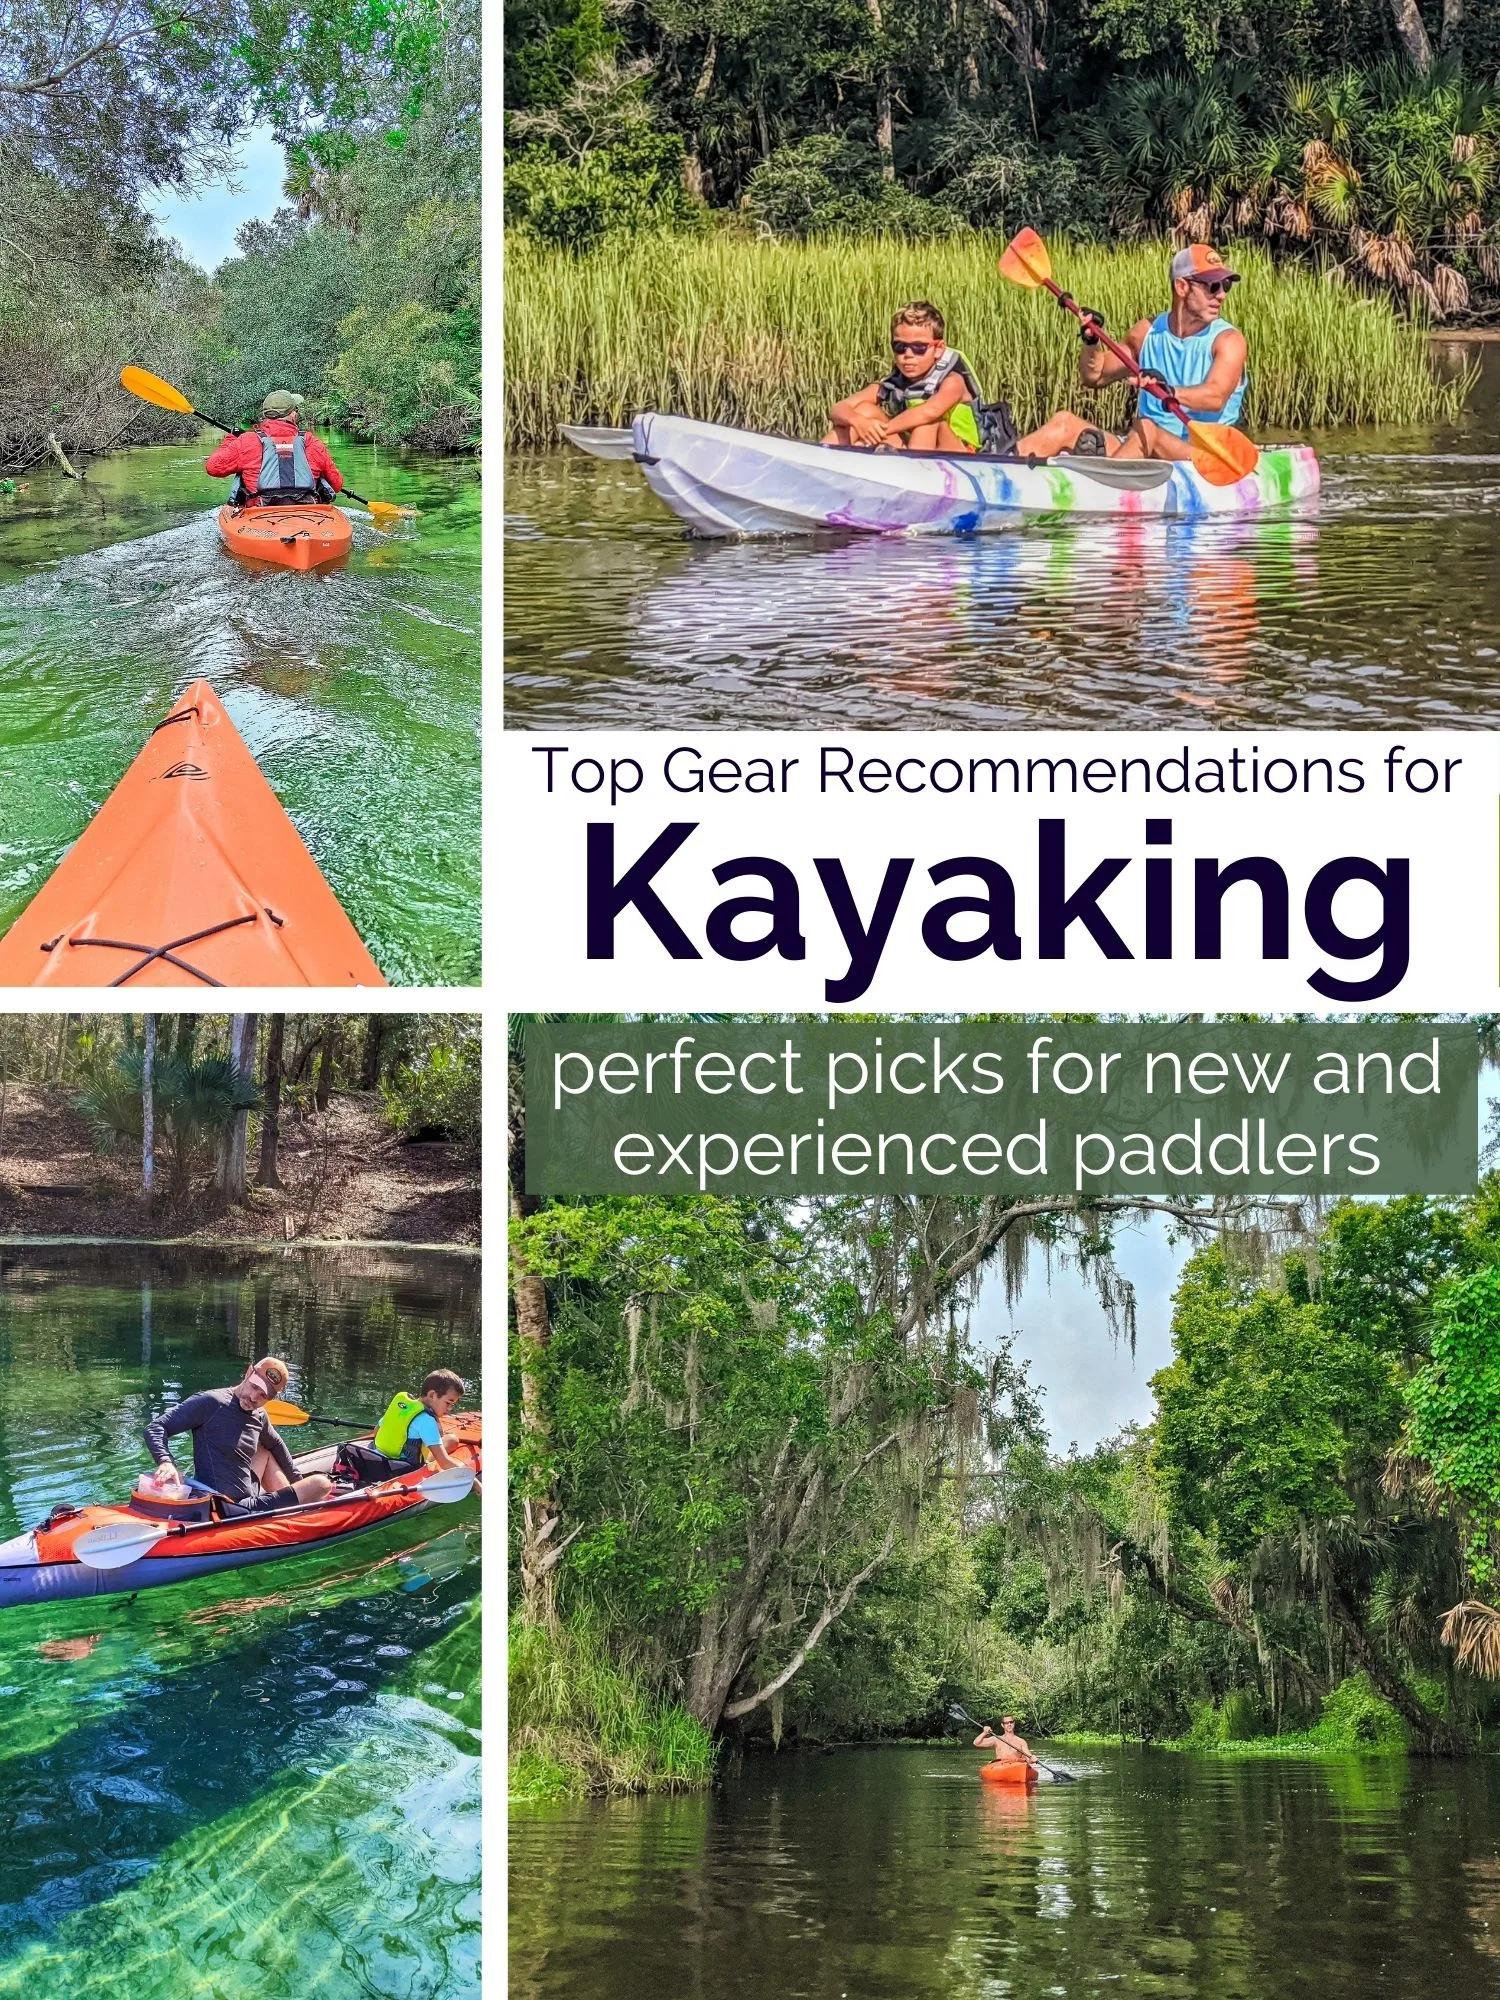 Best Quality Kayaking Gear Recommendations For Beginners - 2TravelDads